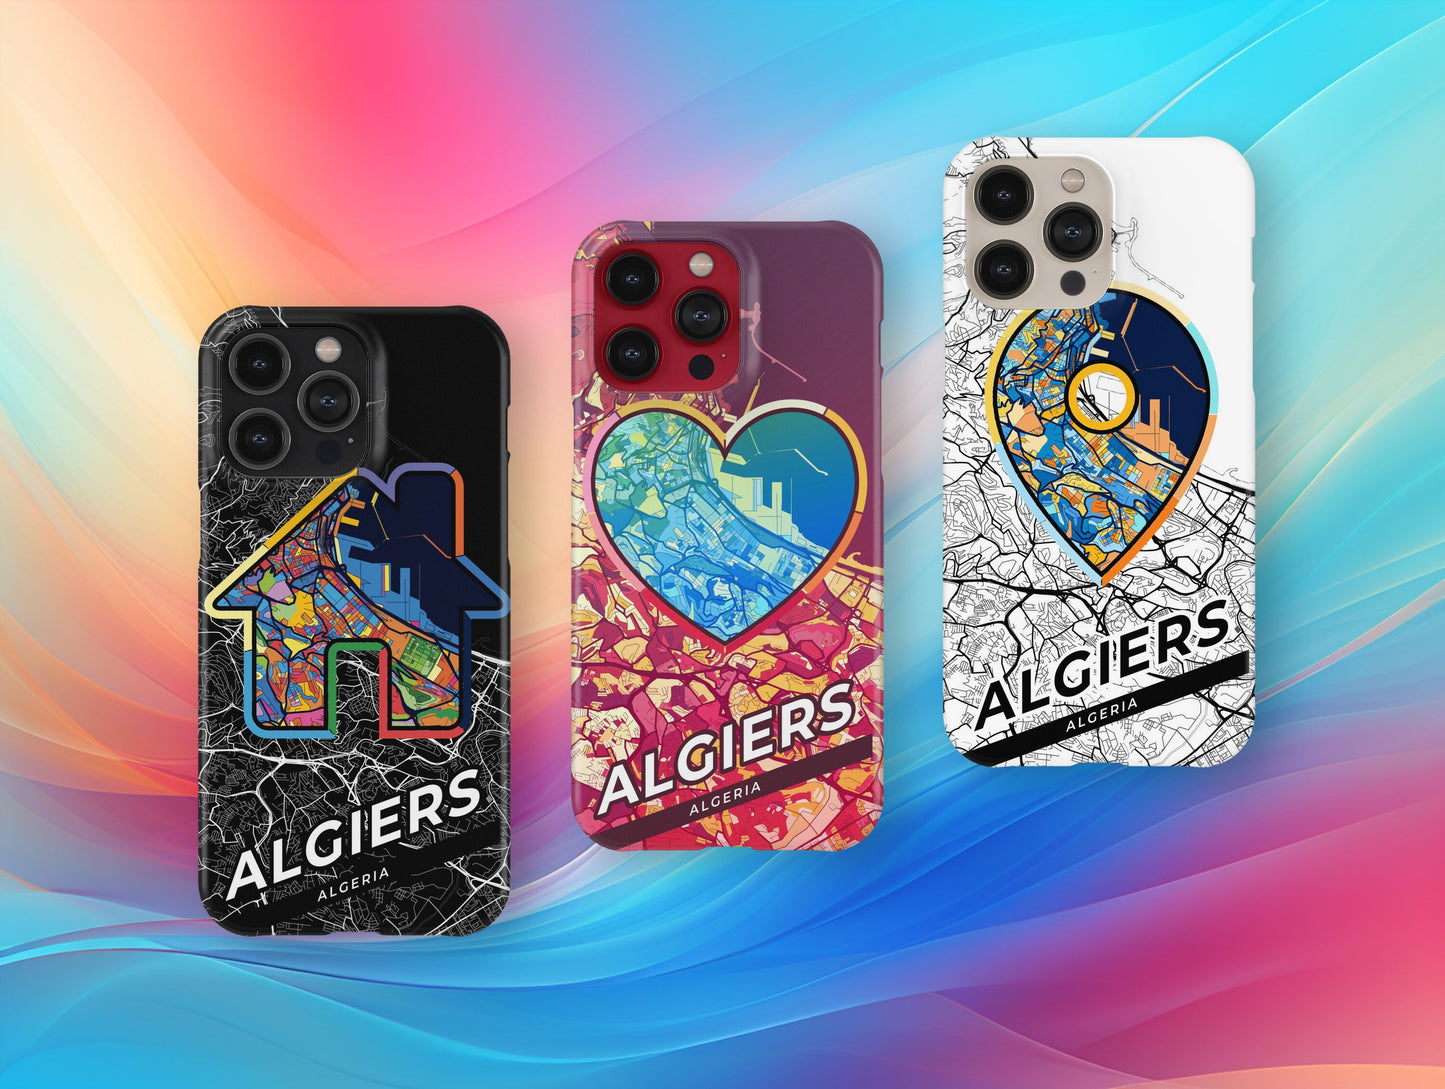 Algiers Algeria slim phone case with colorful icon. Birthday, wedding or housewarming gift. Couple match cases.